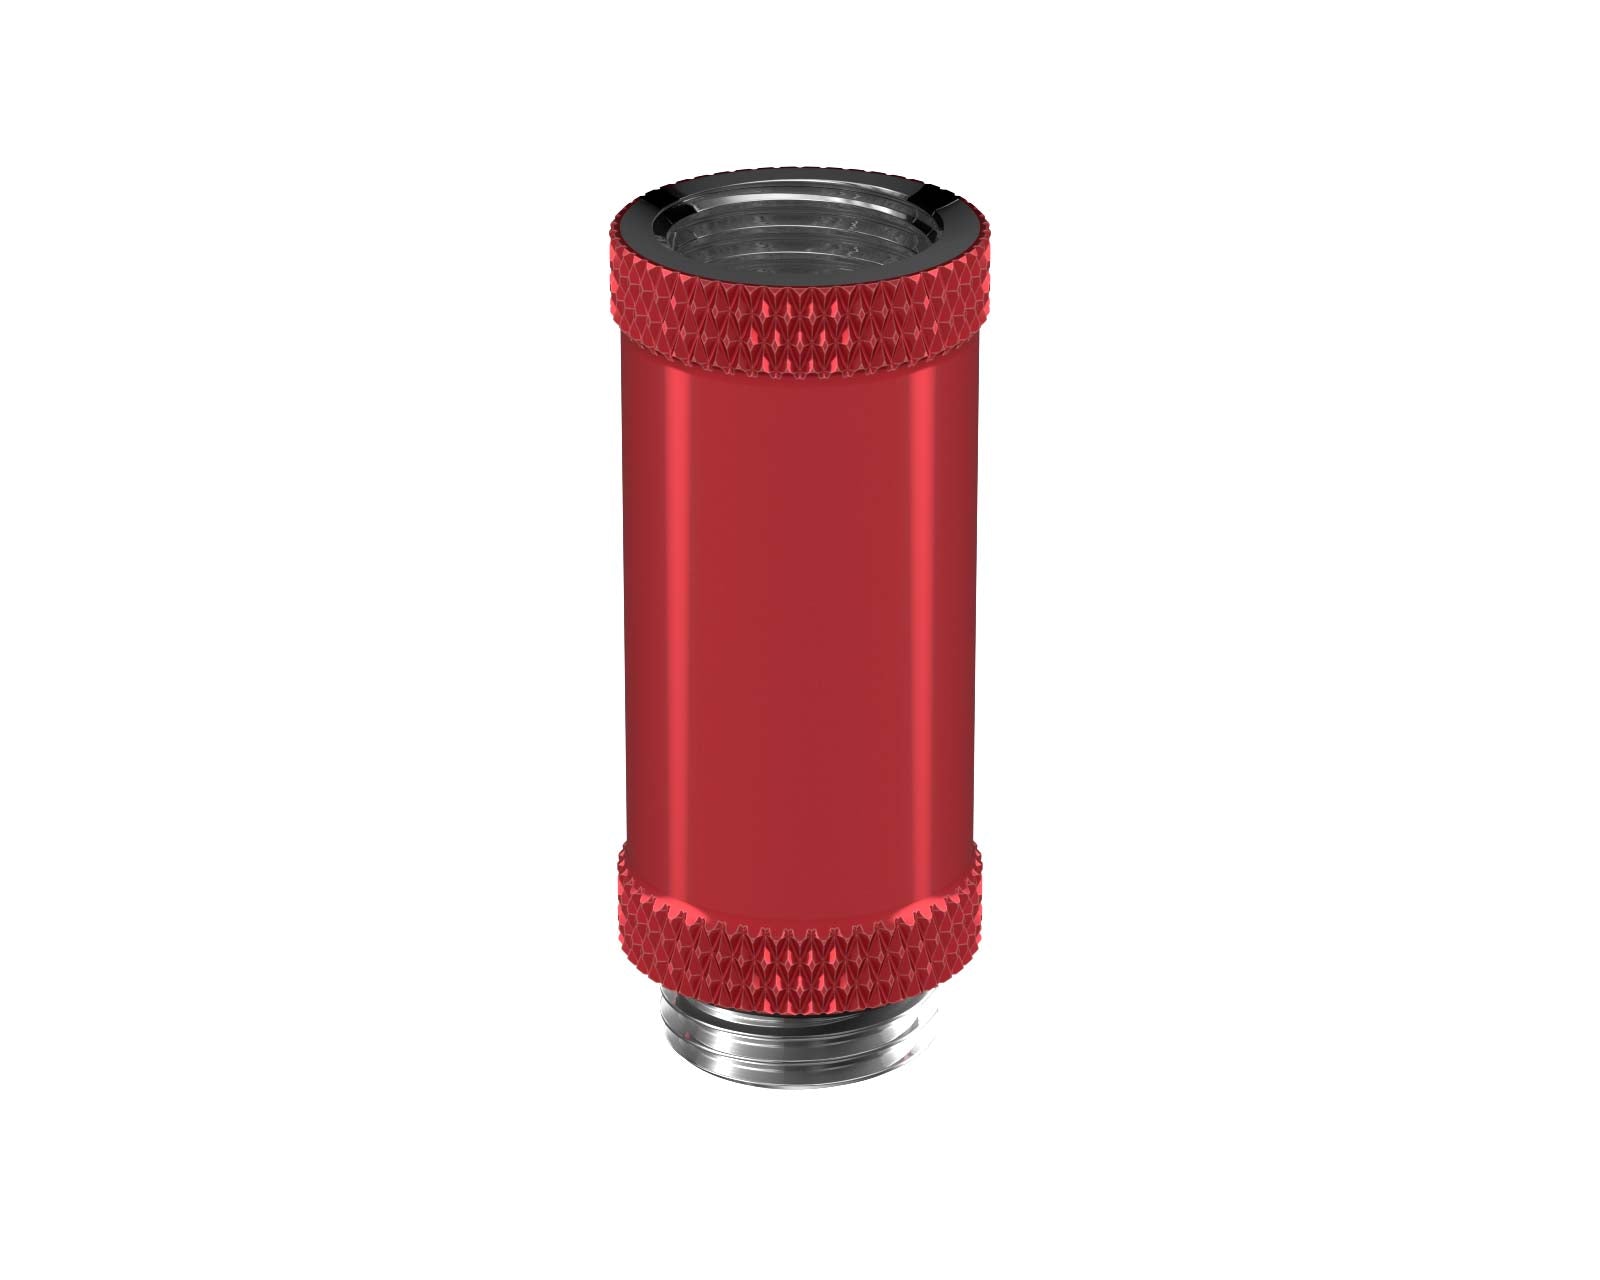 PrimoChill Male to Female G 1/4in. 35mm SX Extension Coupler - PrimoChill - KEEPING IT COOL Candy Red